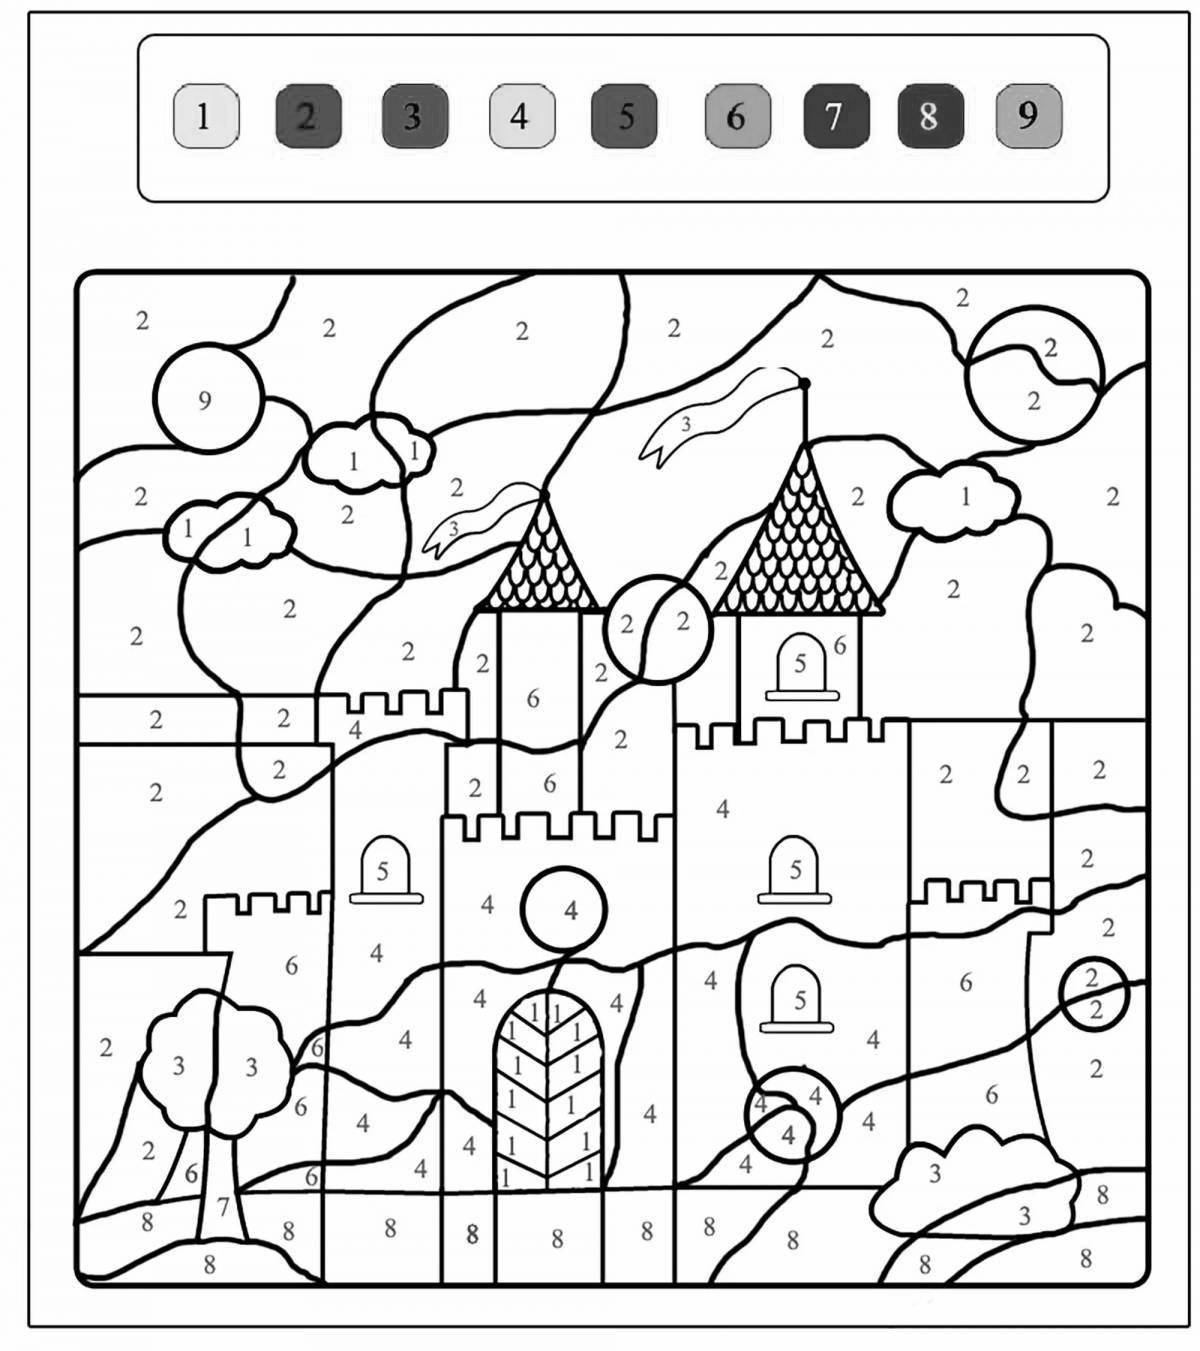 Coloring book with numbers for children